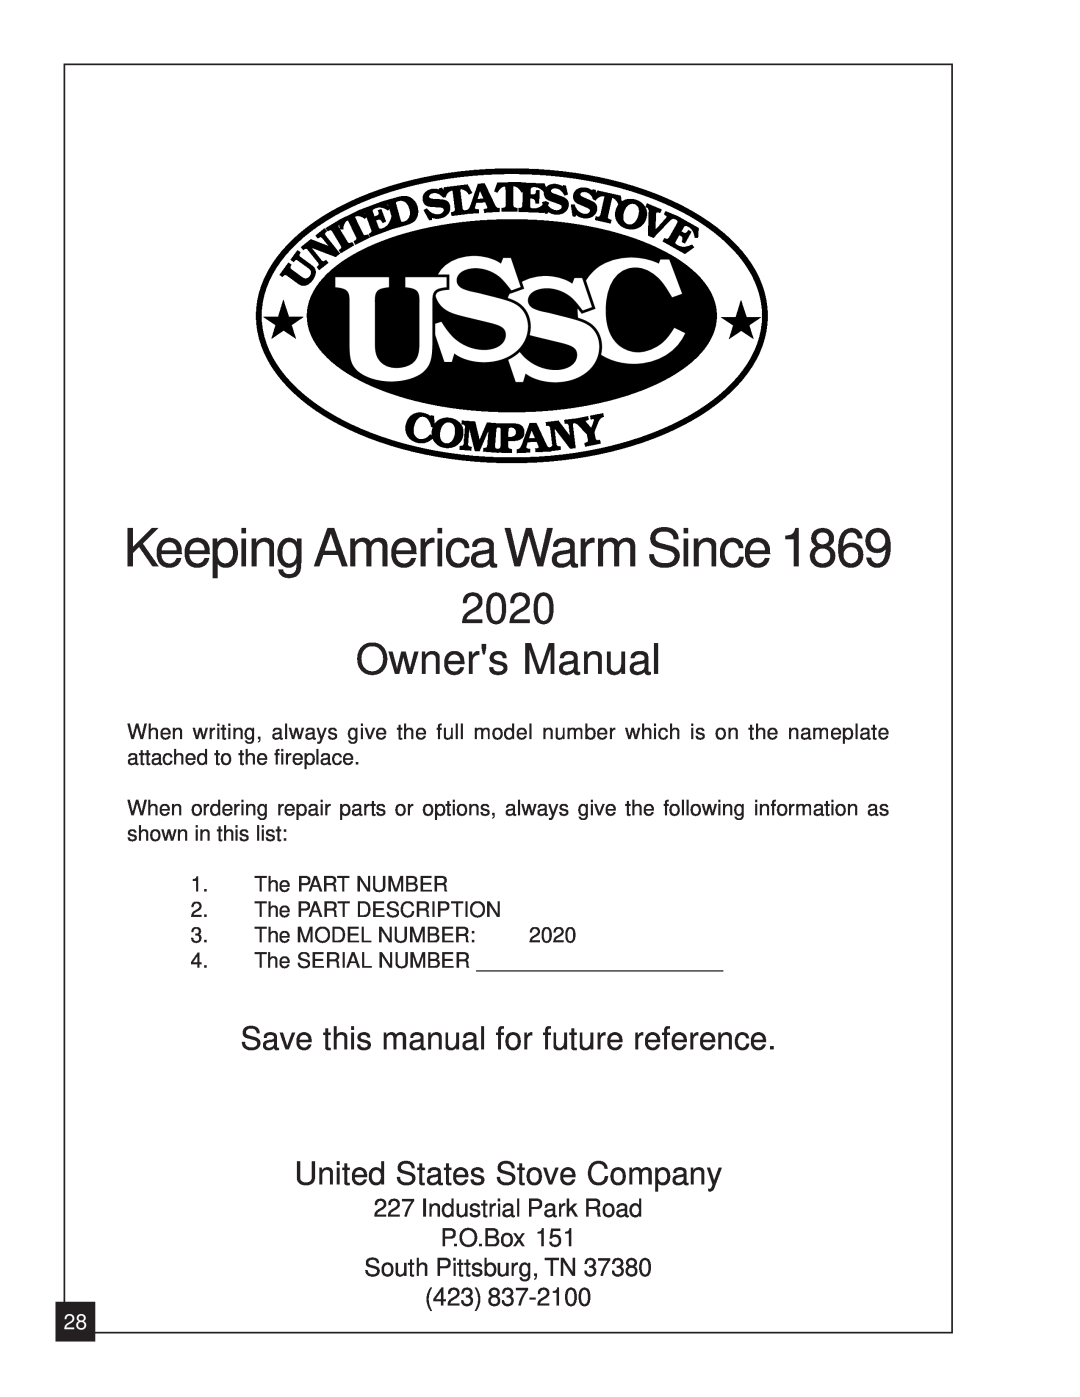 United States Stove 2020N Ussc, Keeping AmericaWarm Since, Mpan, Save this manual for future reference 